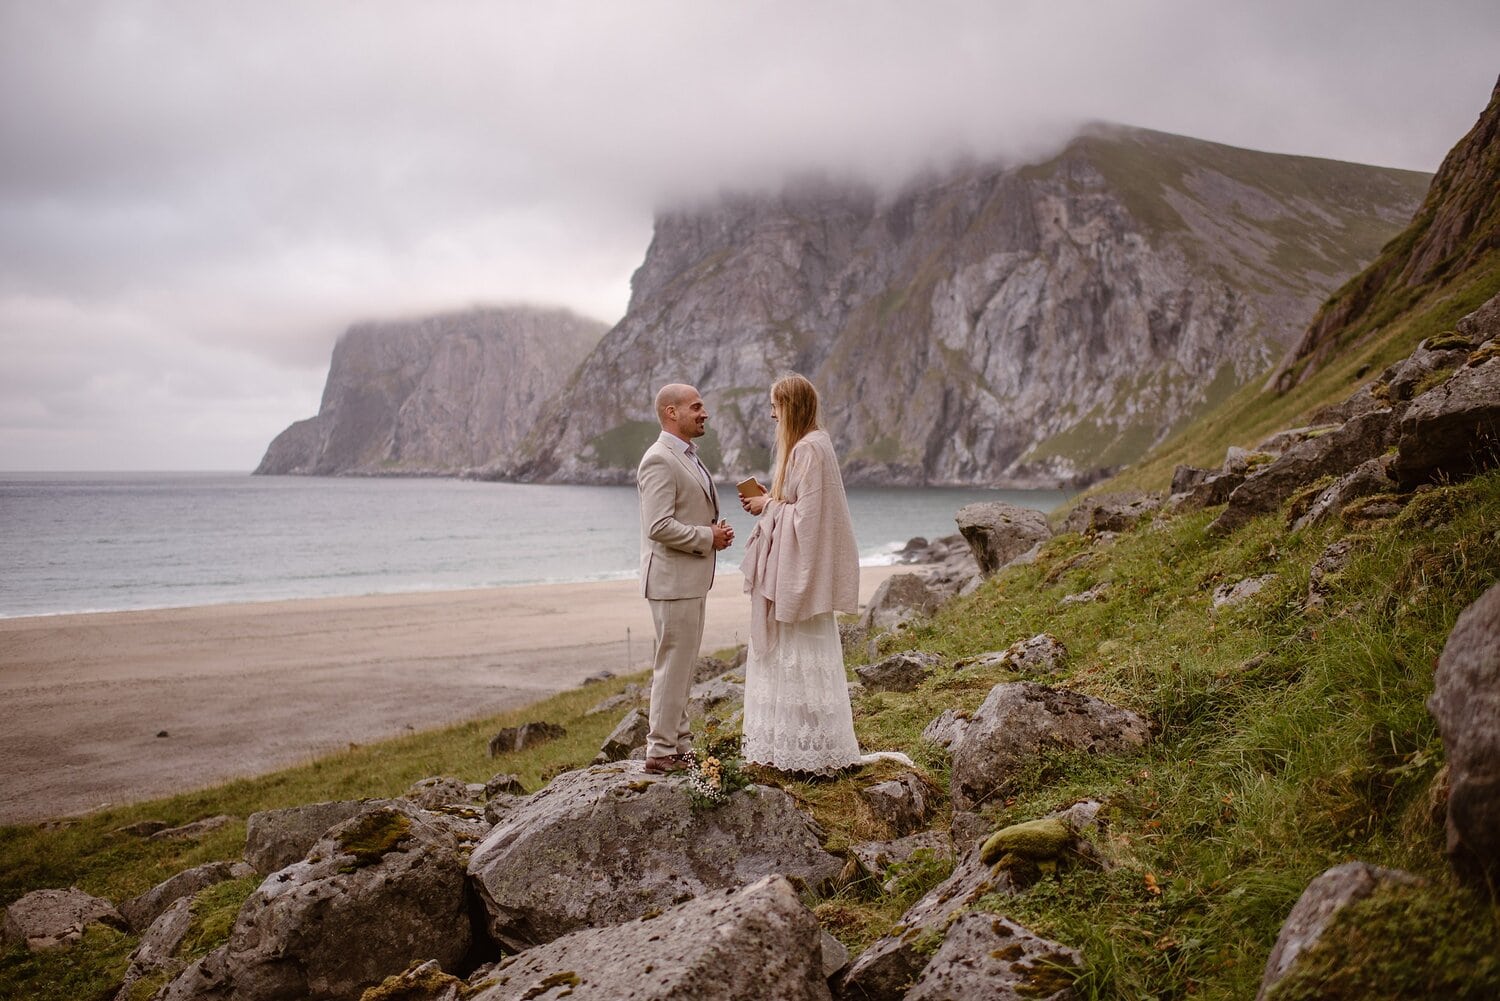 Bride reads her vows during their intimate elopement ceremony on a beach in Norway. There are mountains in the background. 